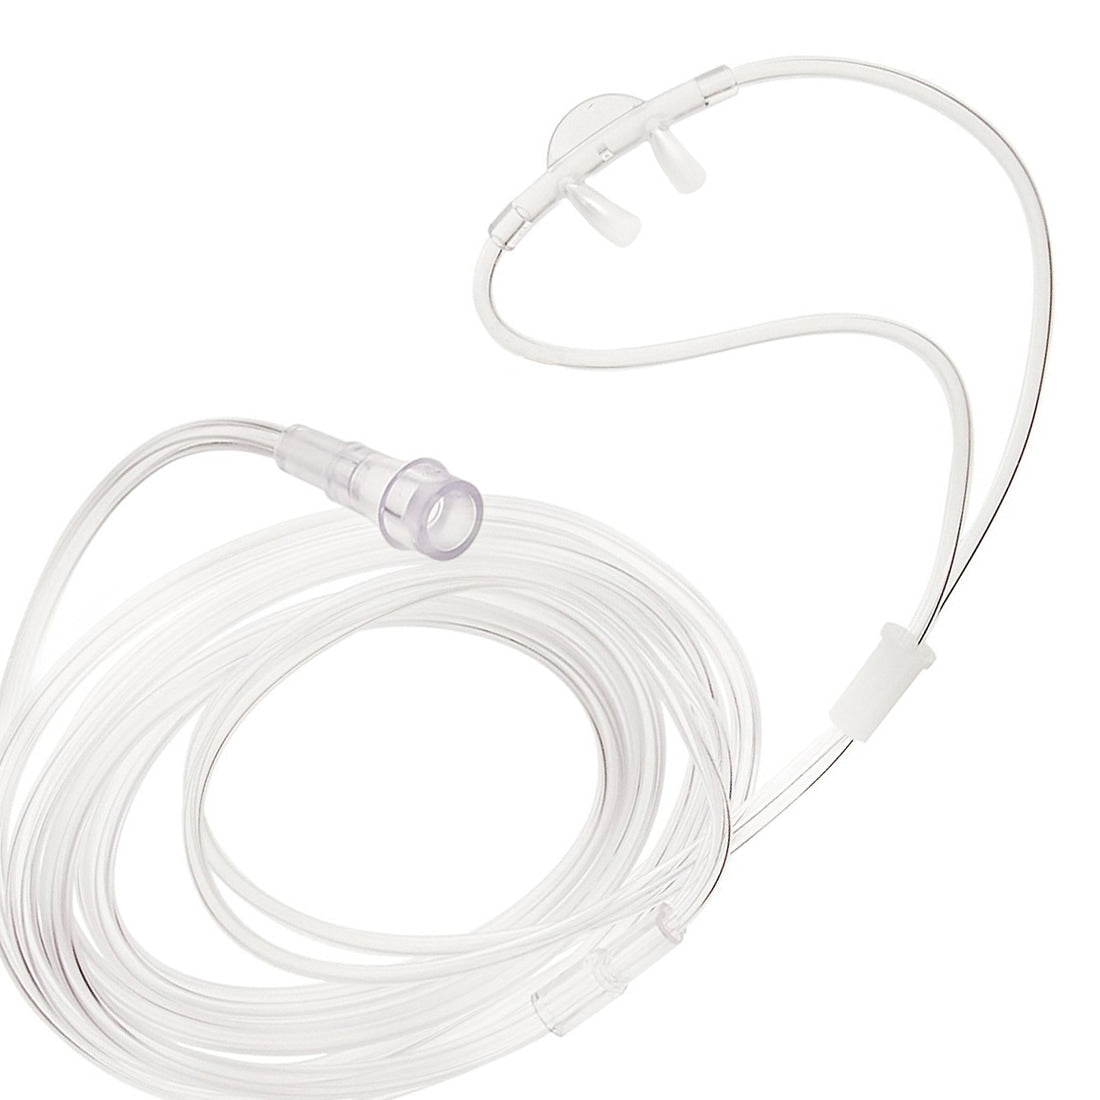 Flare Tip Over-the-Ear Adult Nasal Cannula with 7 Foot Star Lumen Oxygen Supply Tubing